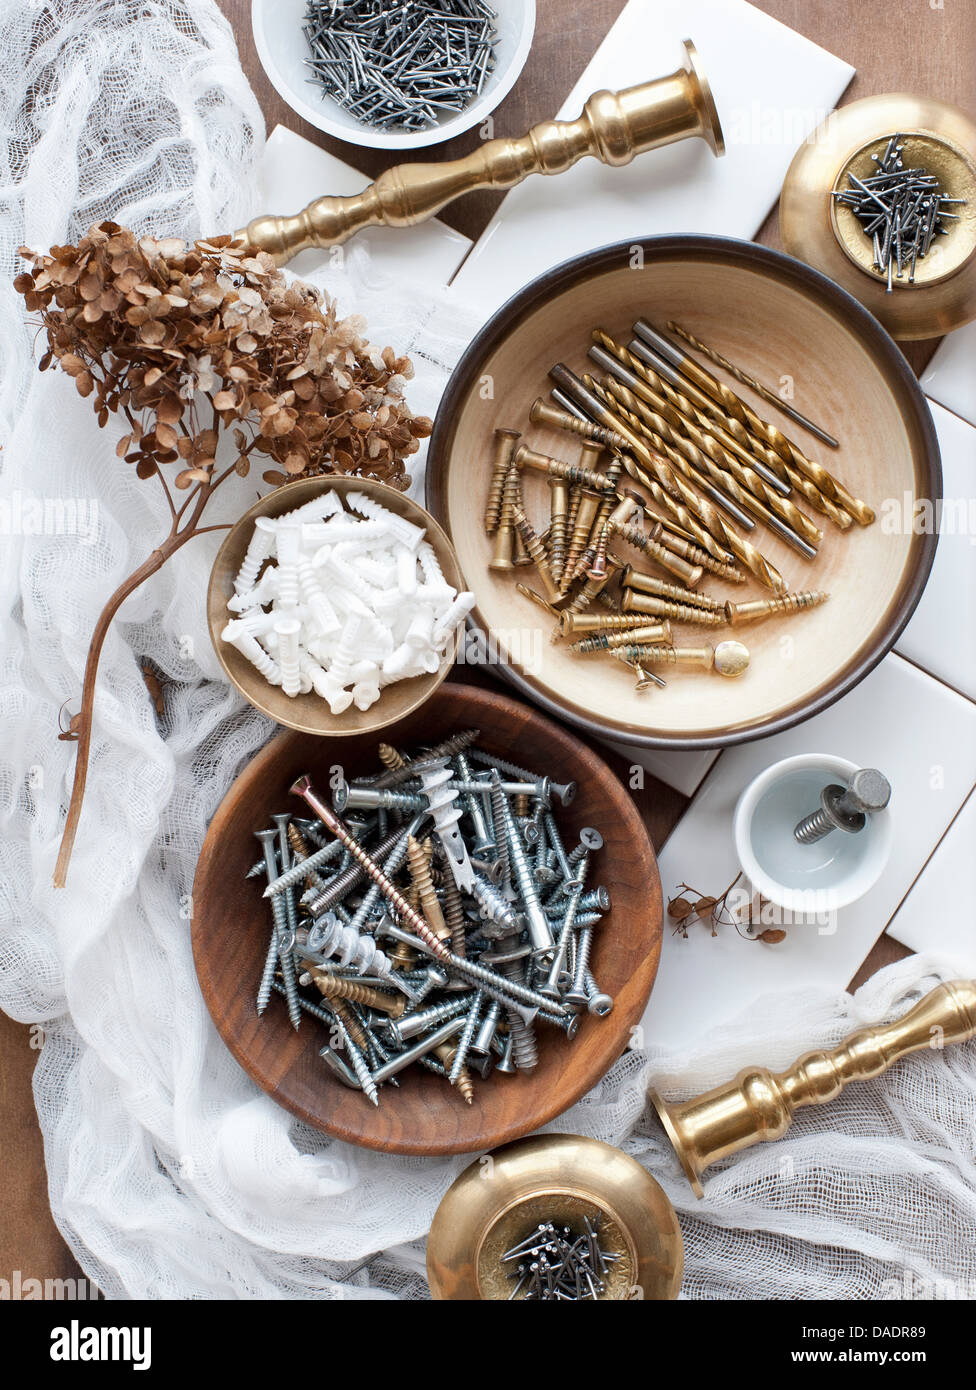 Still life of screws, nails and brass candlesticks Stock Photo